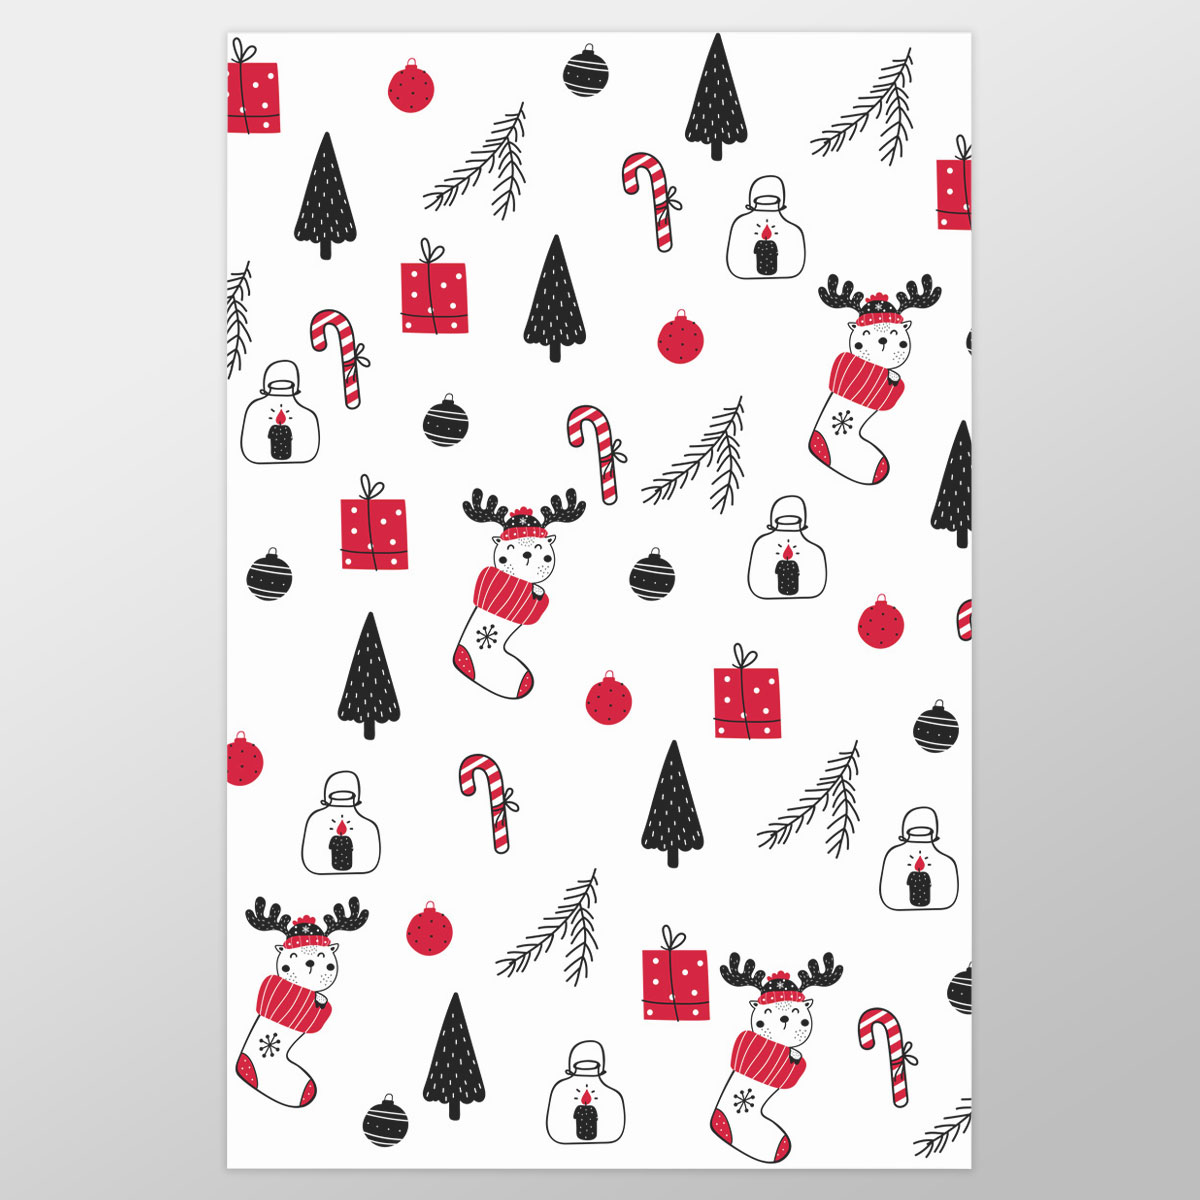 Reindeer Clipart In Hand Drawn Red Socks, Christmas Balls, Candy Canes, And Christmas Gifts Seamless White Pattern Wrapping Paper